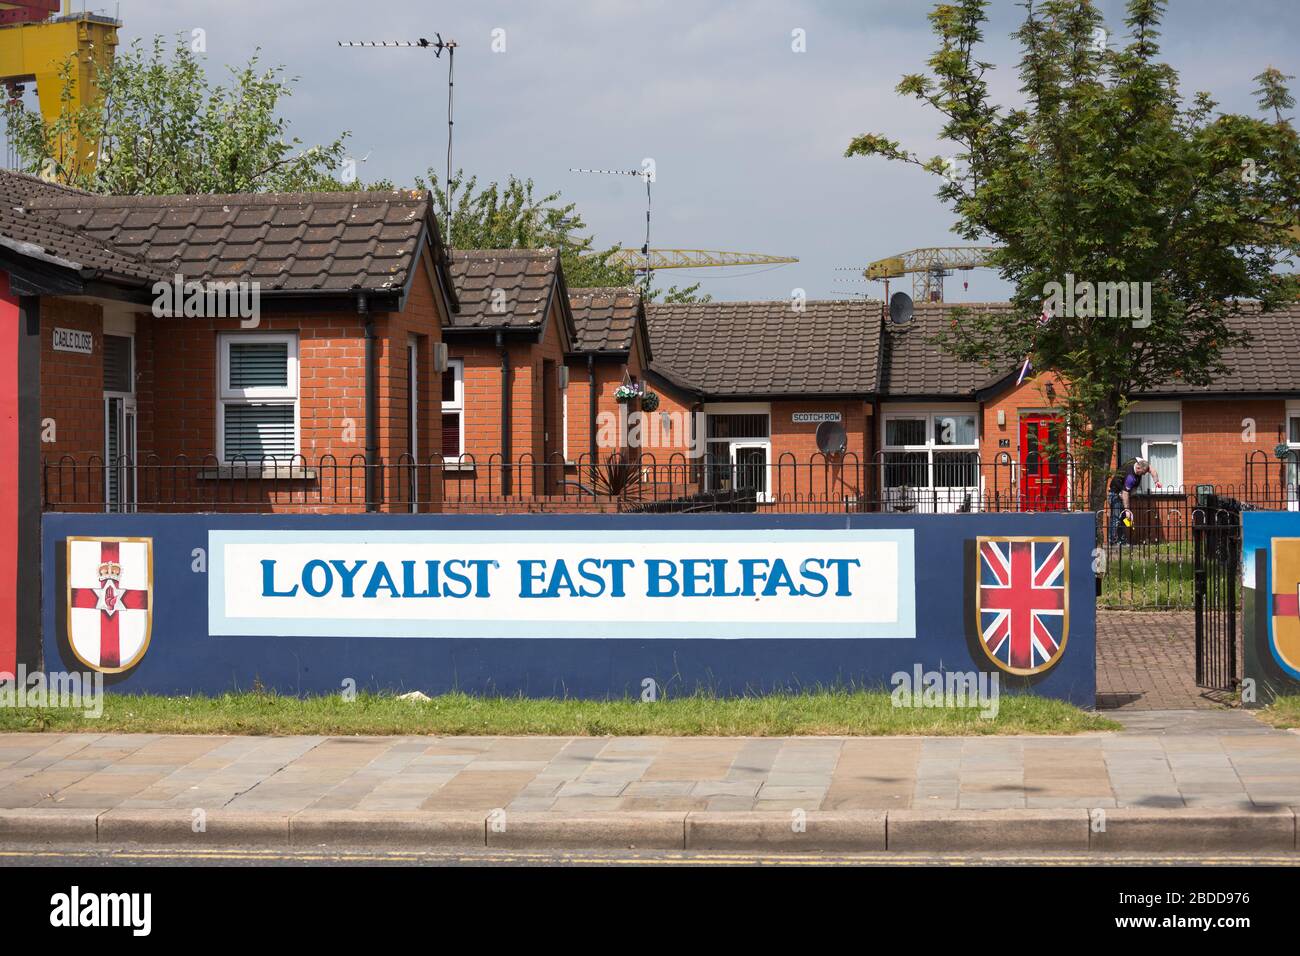 15.07.2019, Belfast, Northern Ireland, Great Britain - Political slogan in front of workers' housing estate, Protestant East Belfast. 00A190715D171CAR Stock Photo